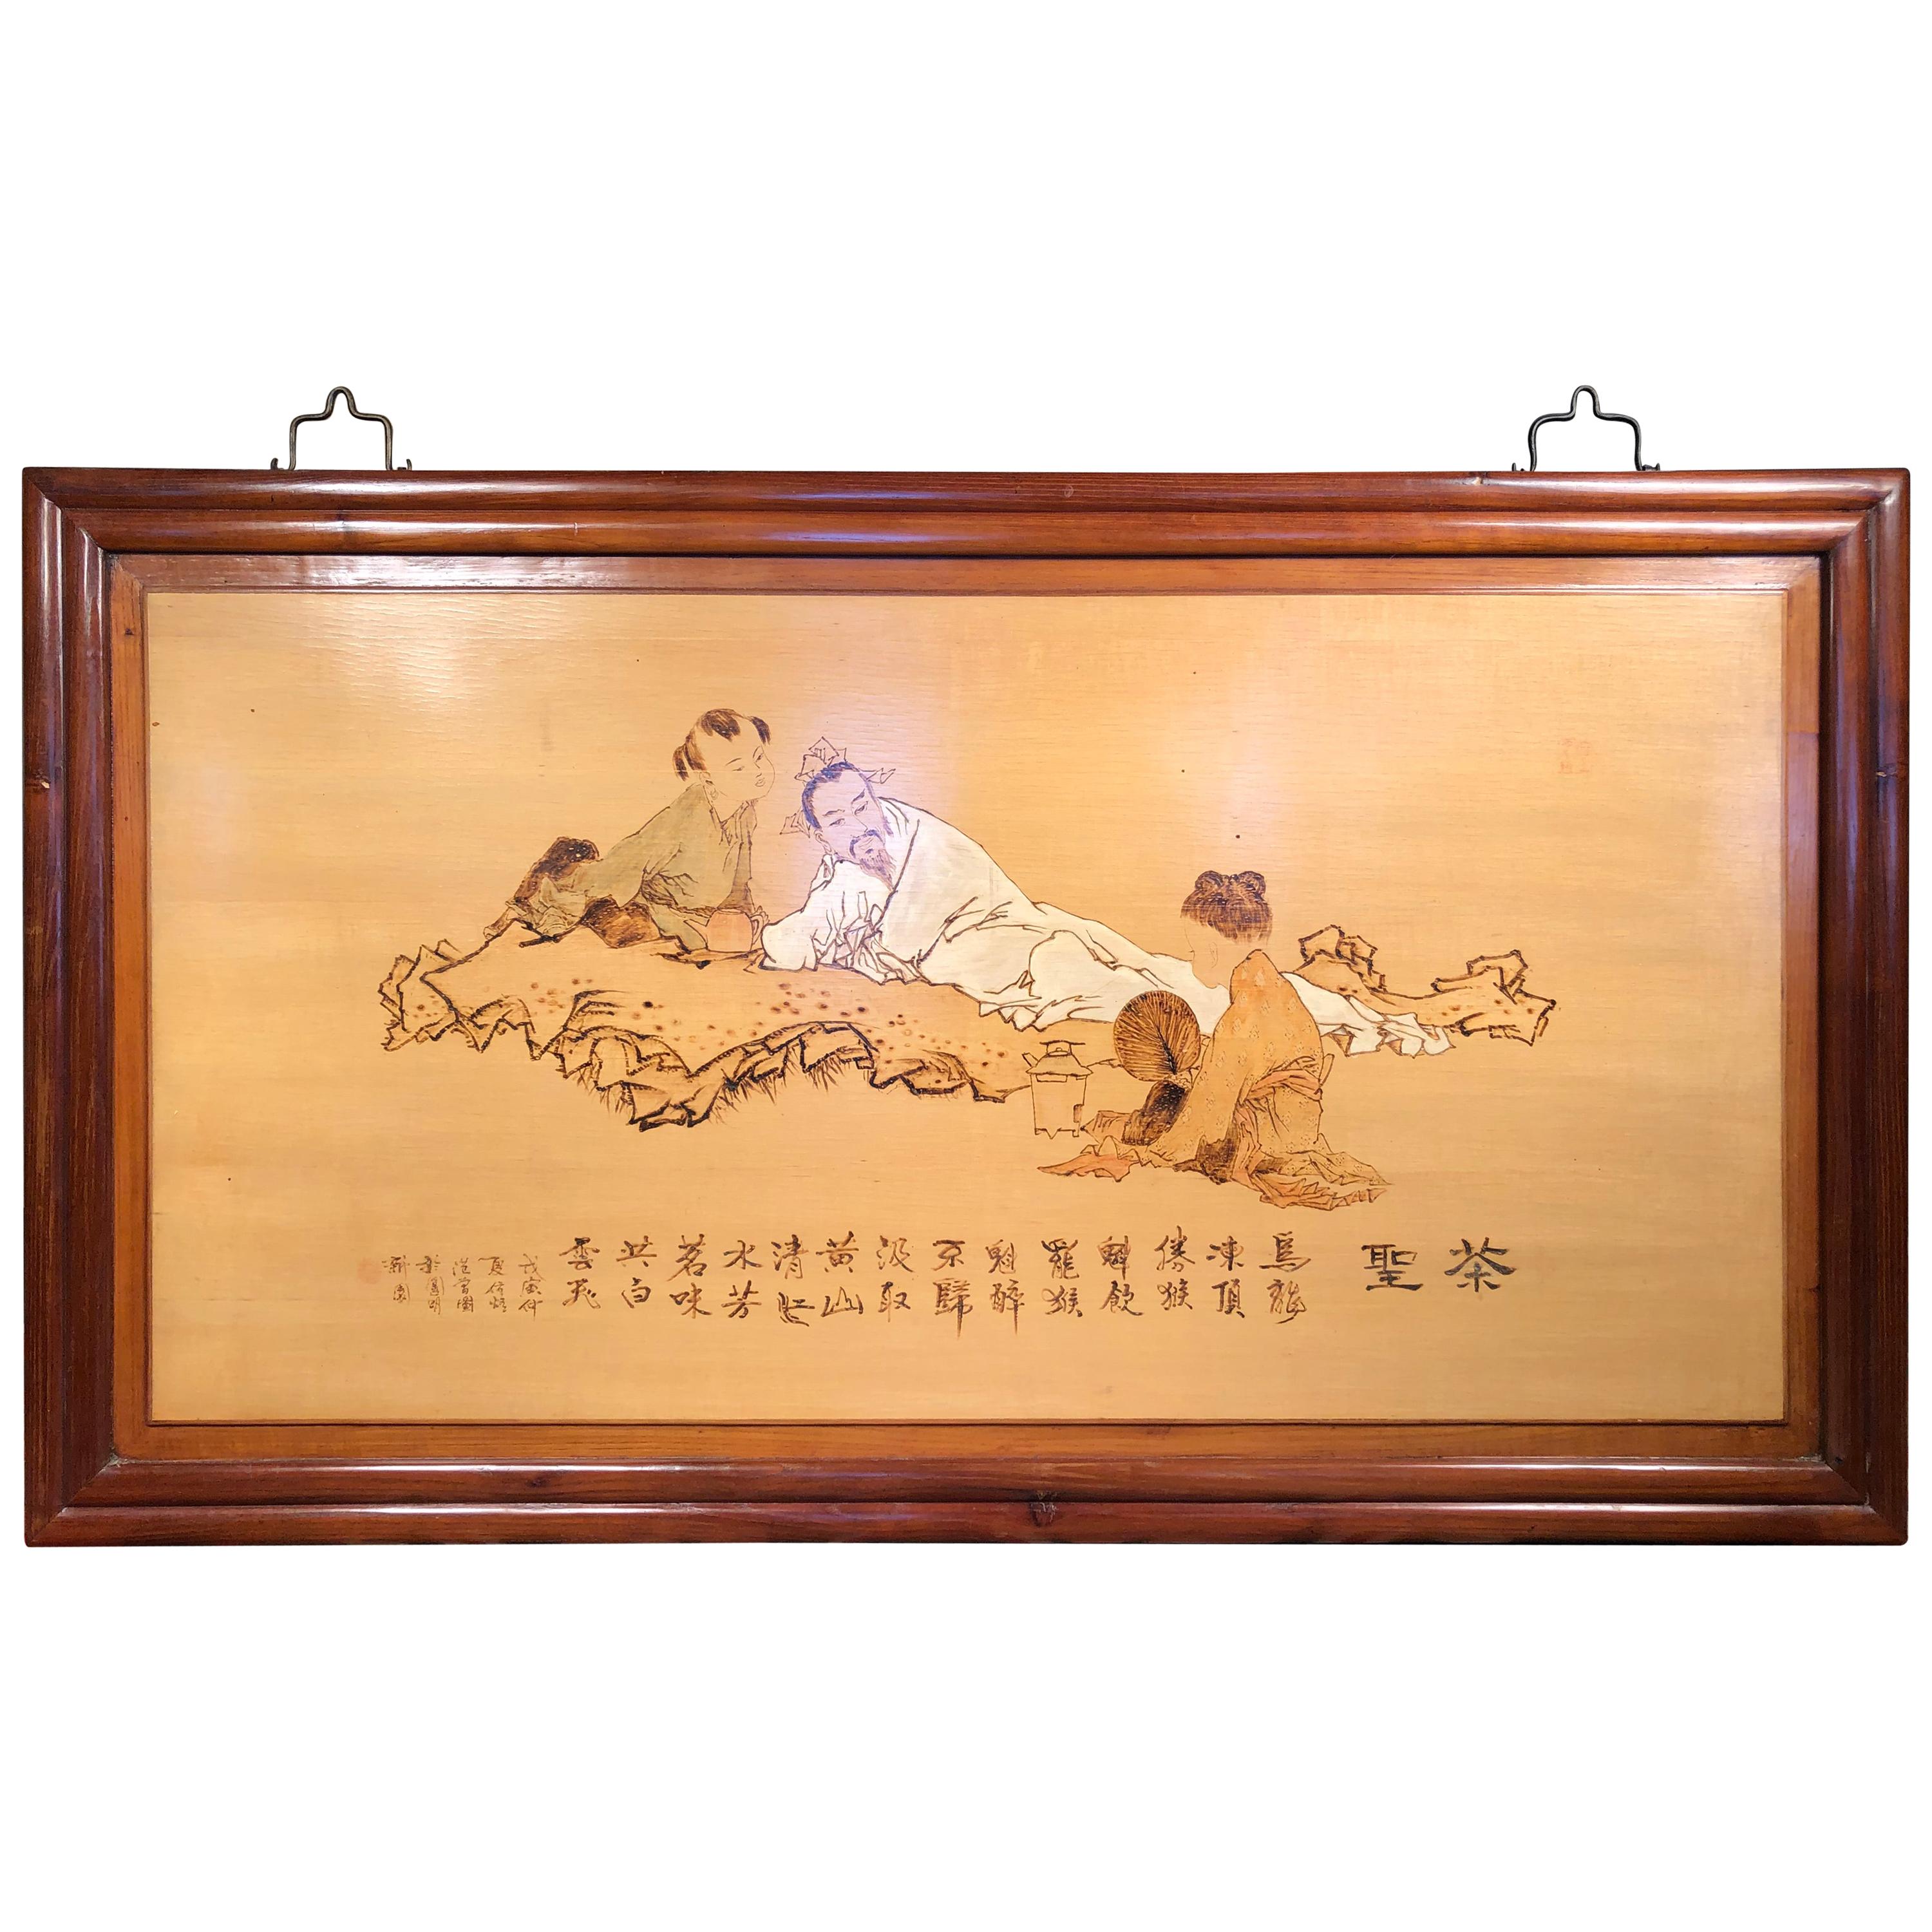 Important Chinese Pyrography Painting of “LUK YU” Famous Tang Dynasty Tea master